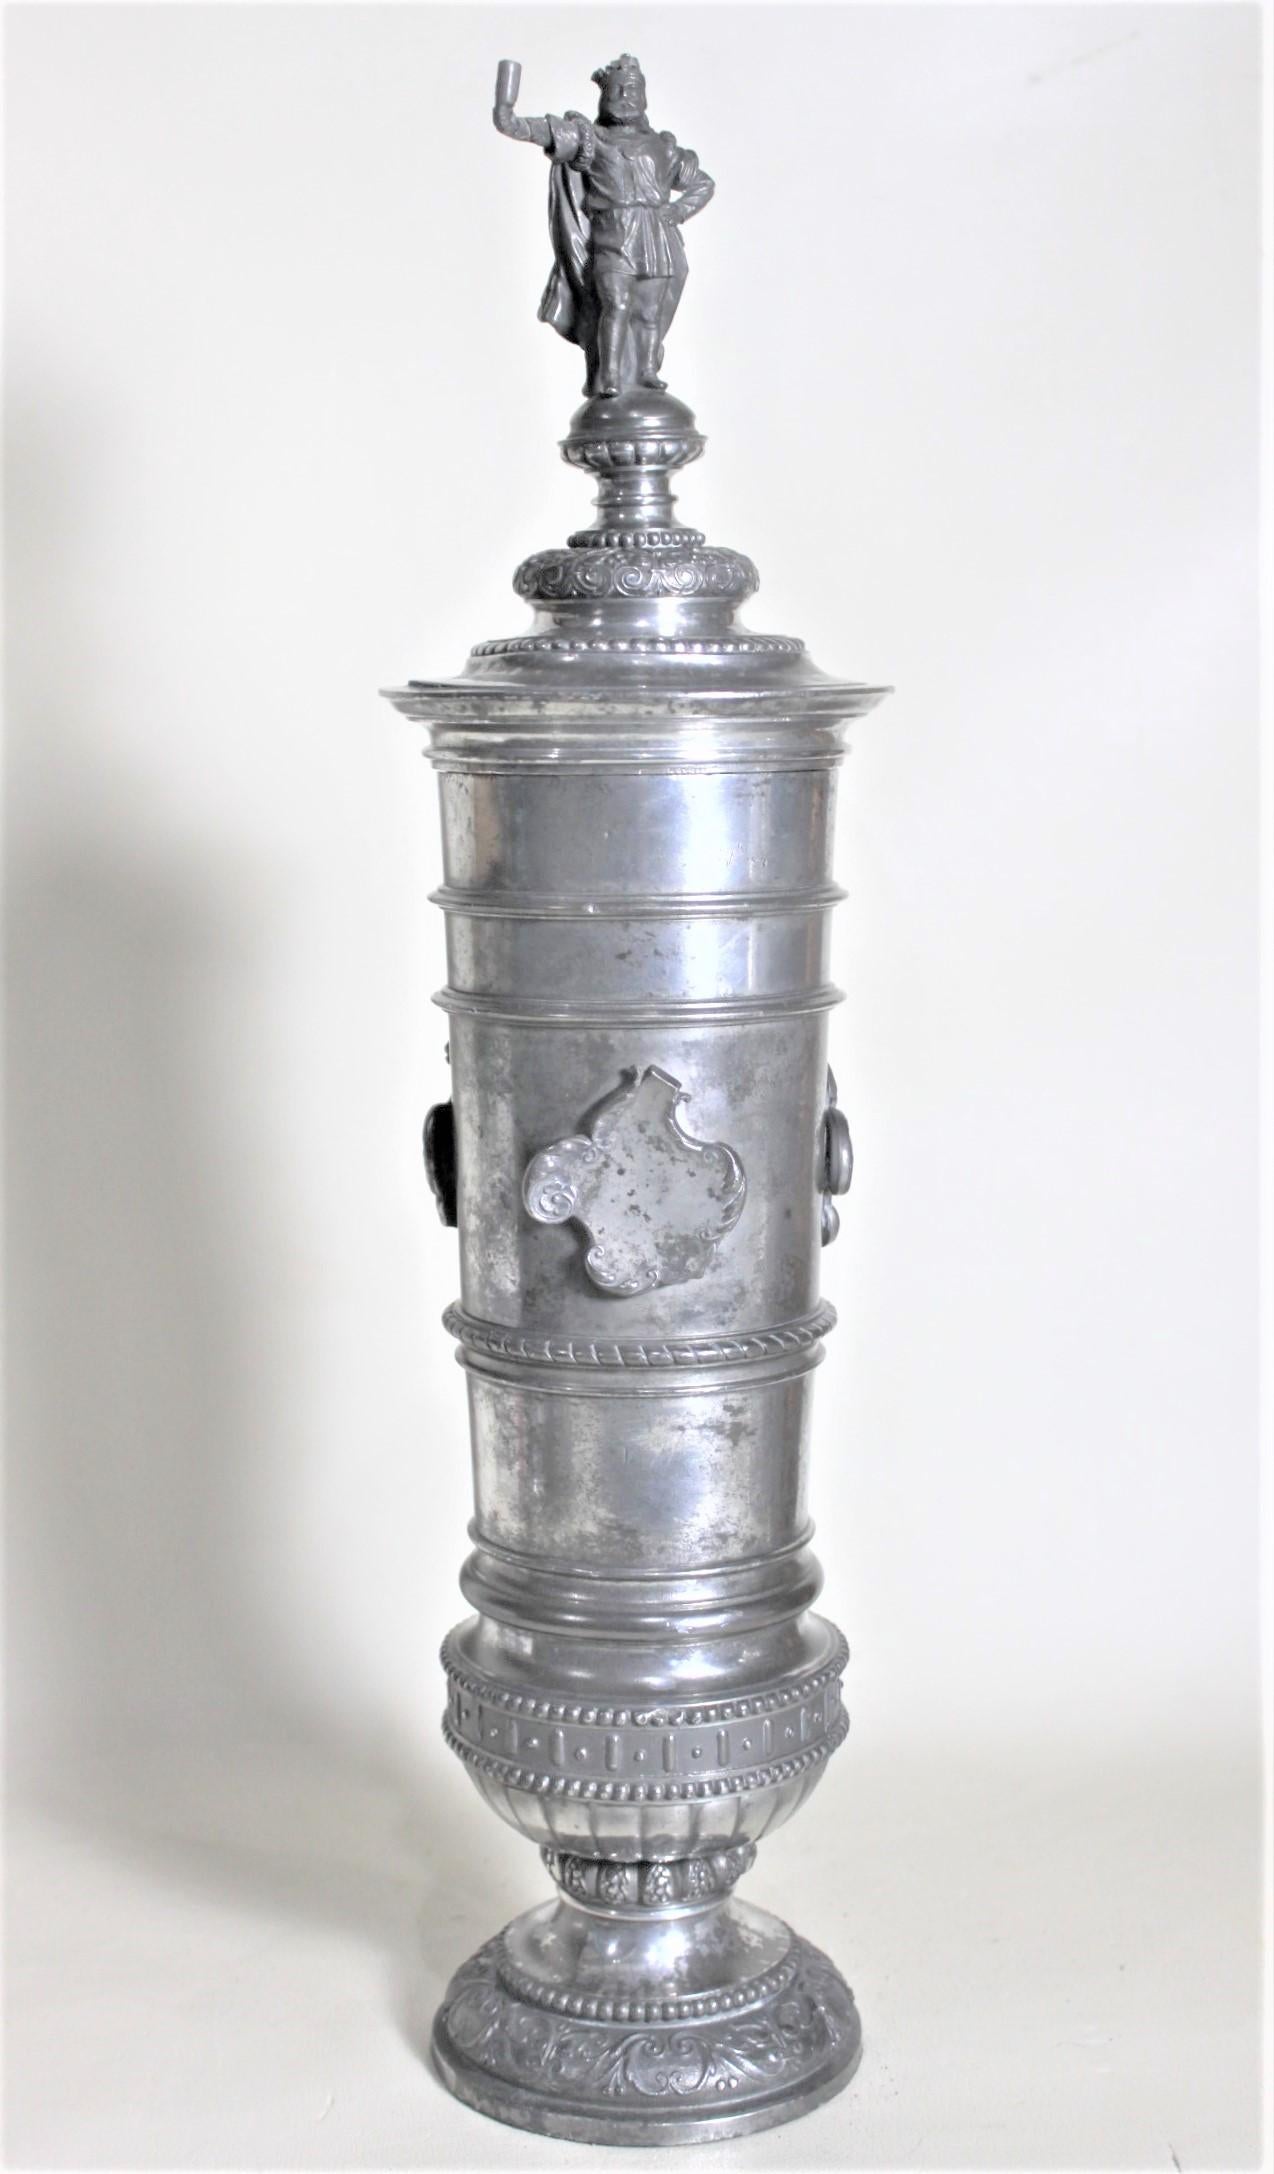 This antique silver plated covered urn or chalice shows no maker's marks but is presumed to have been made in England in circa 1900 in the period Edwardian style. This chalice could have been made for the purposes of a trophy as it has figural